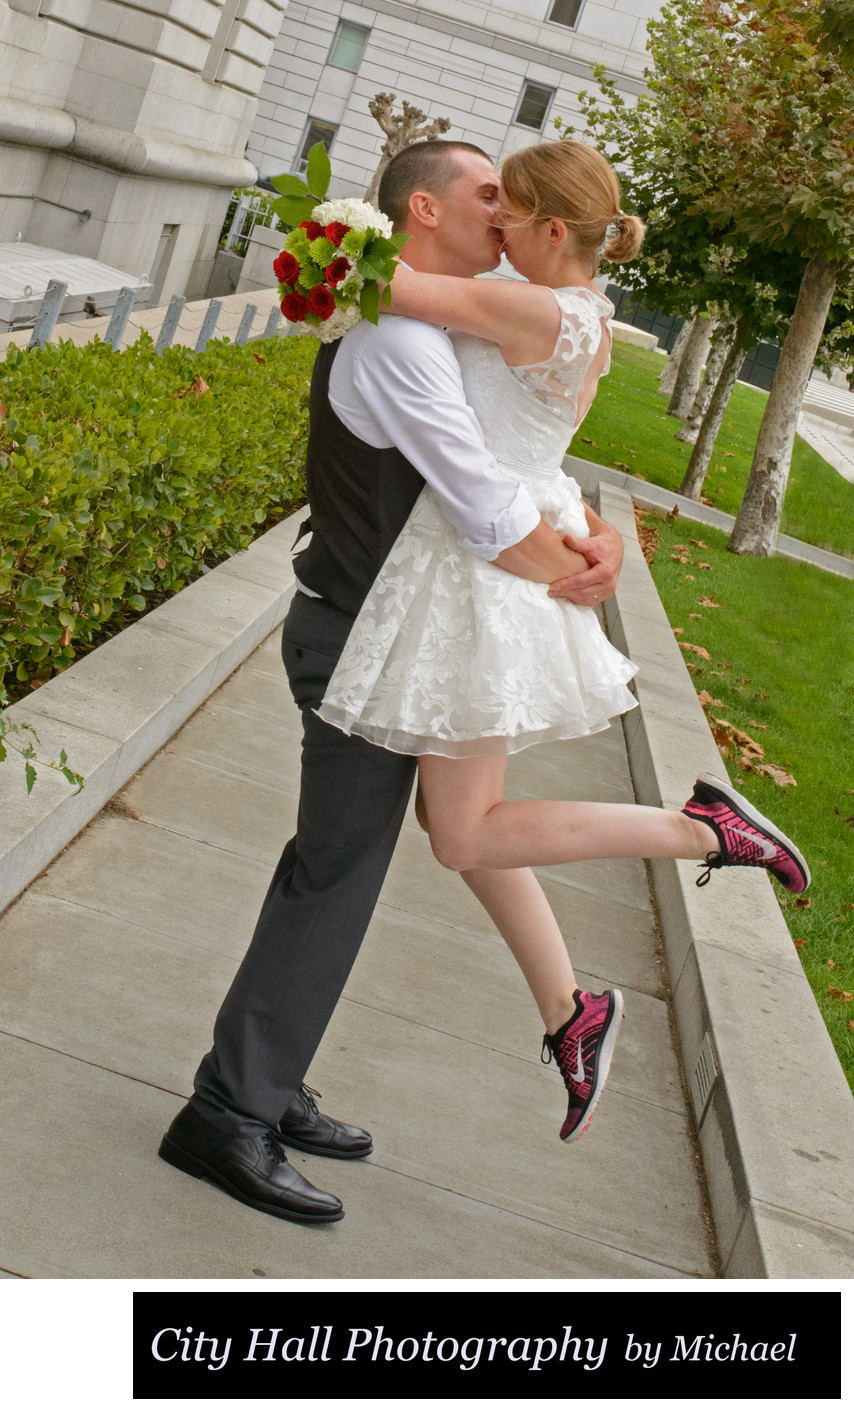 Lift kiss outside of San Francisco City Hall with red sneakers